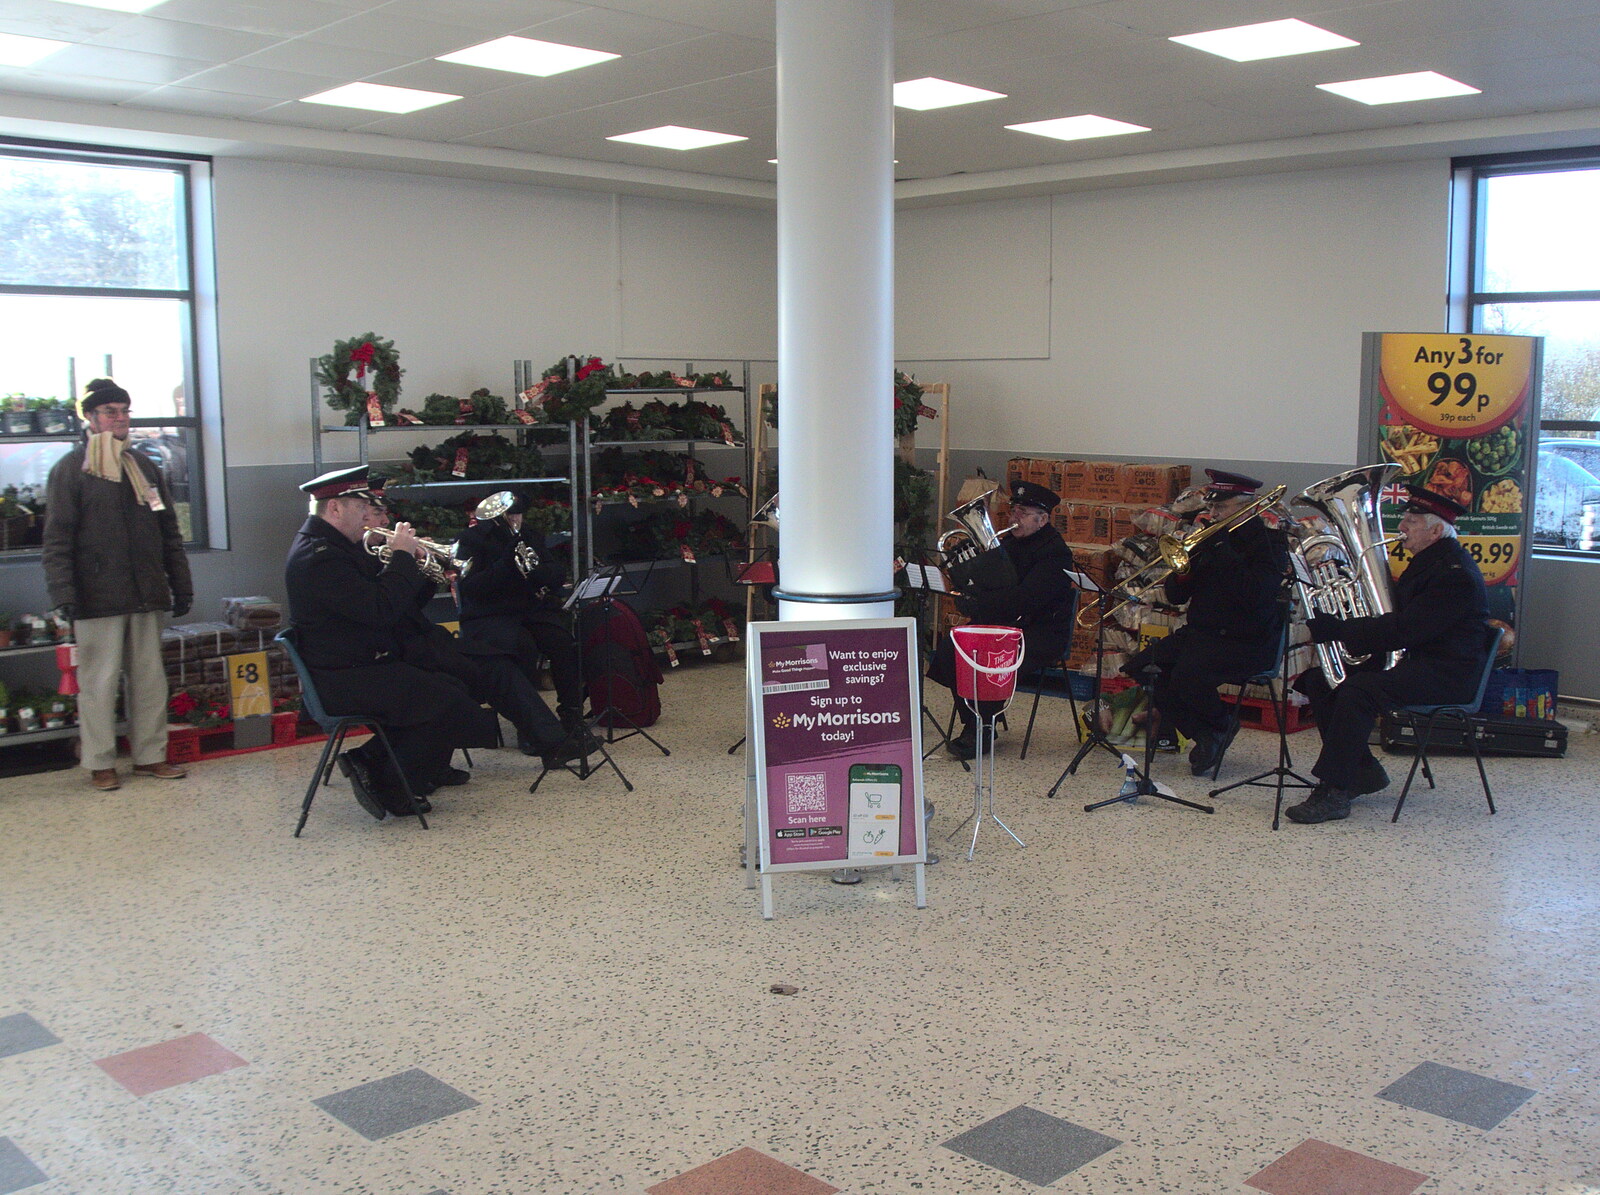 The Salvation Army's playing in Morrisons from A Shopping Trip to Bury St. Edmunds, Suffolk - 14th December 2022